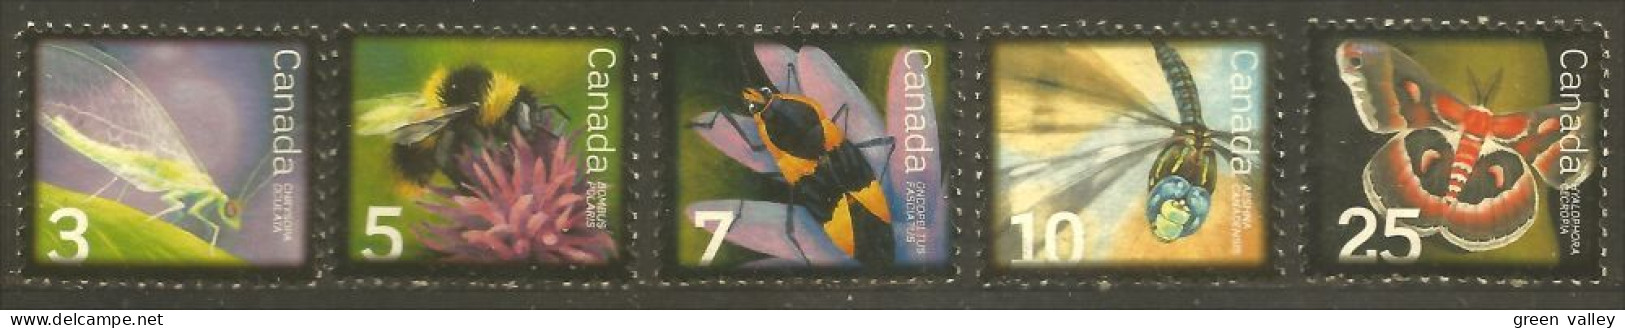 970 Canada Insectes Coccinelle Papillon Abeille Libellule Dragonfly Bee Biene Butterfly Sans Gomme (322) - Honeybees